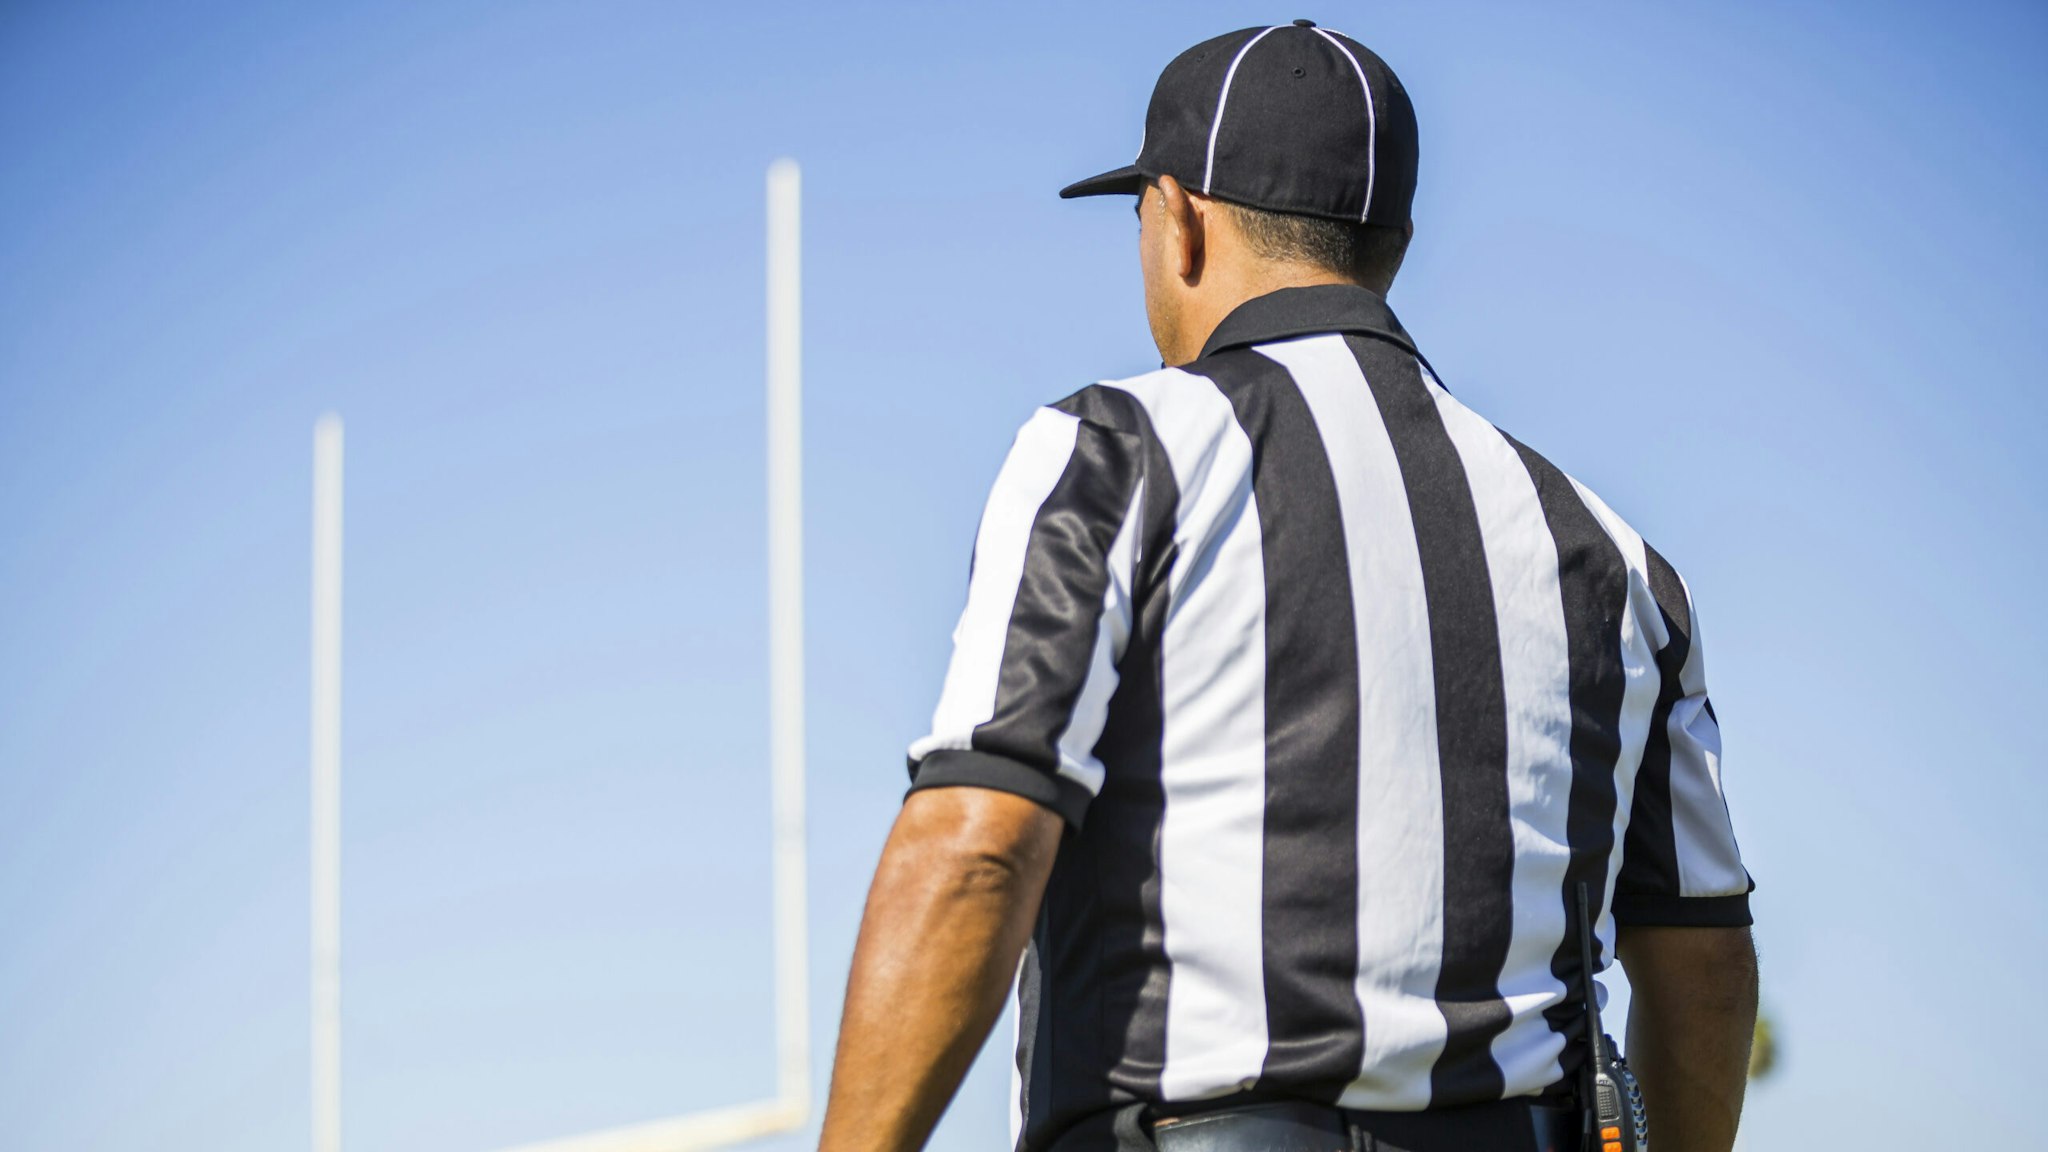 Rear view of football referee wearing black and white striped shirt